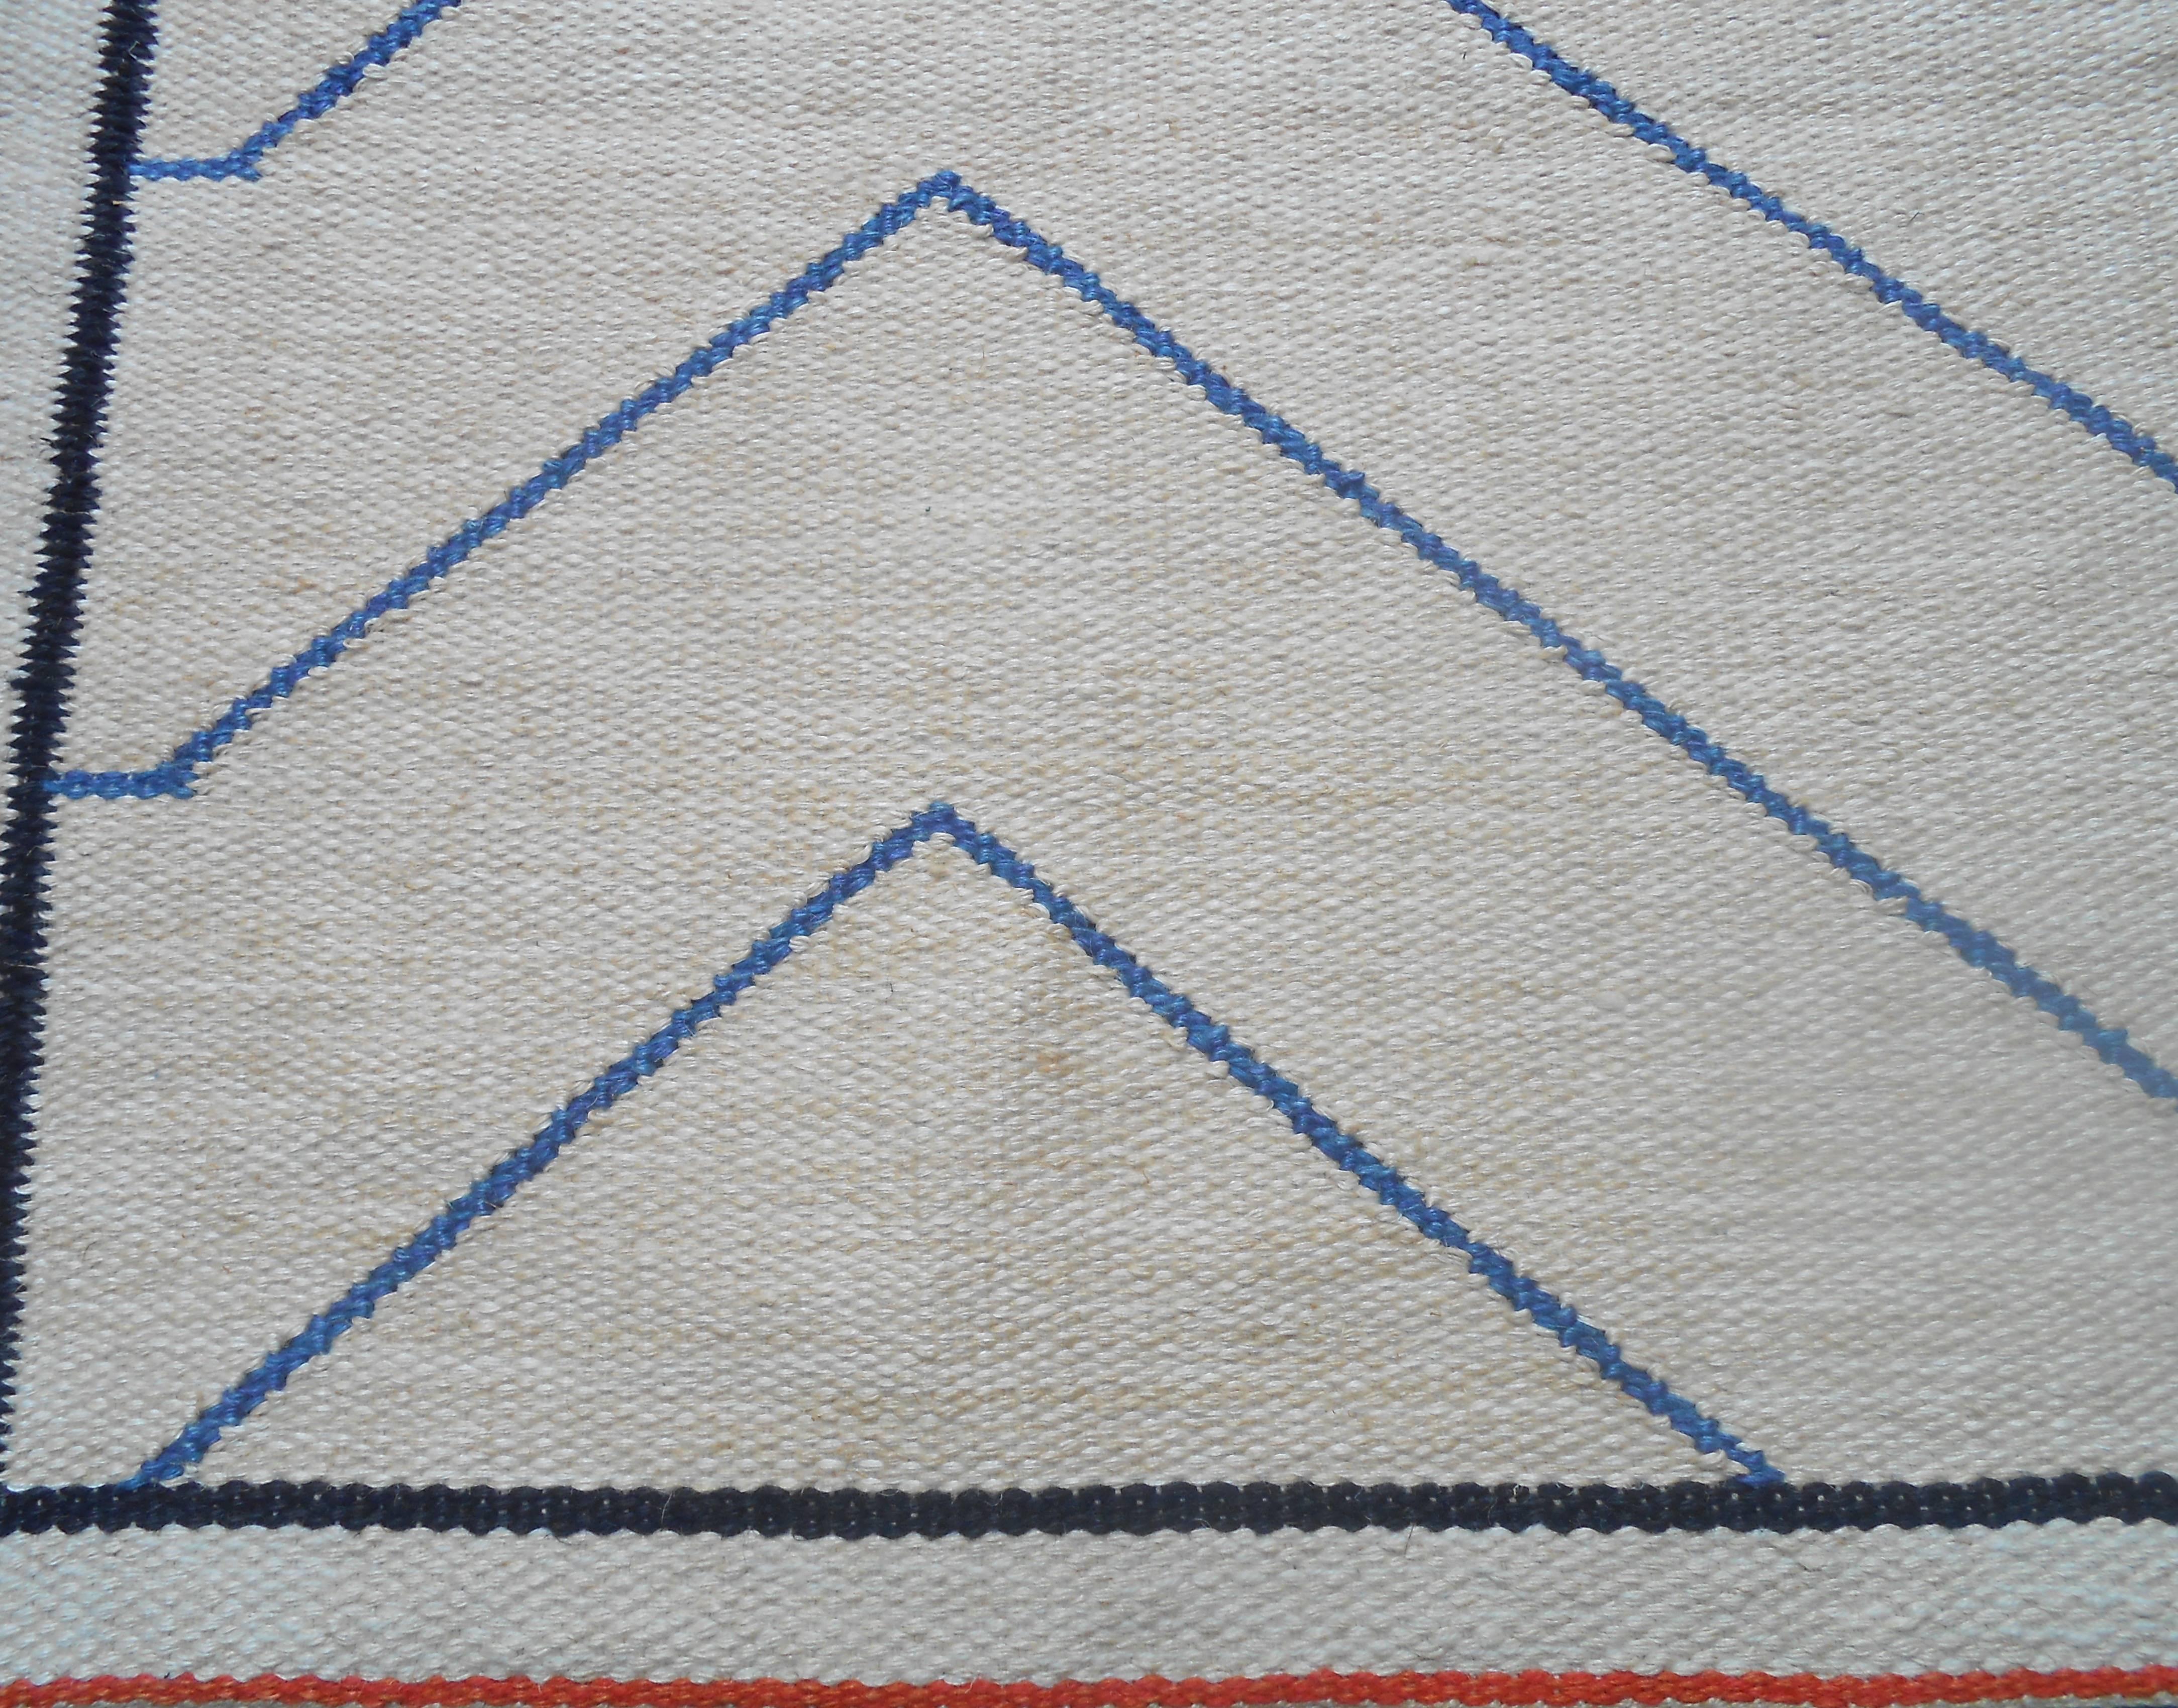 Based on a concrete and geometric idiom GP works with woven tapestries. In her compositions, she uses lines and shapes to achieve a tension and a spatial effect, with inspiration drawn from architecture. The tapestries are woven on a foot-powered